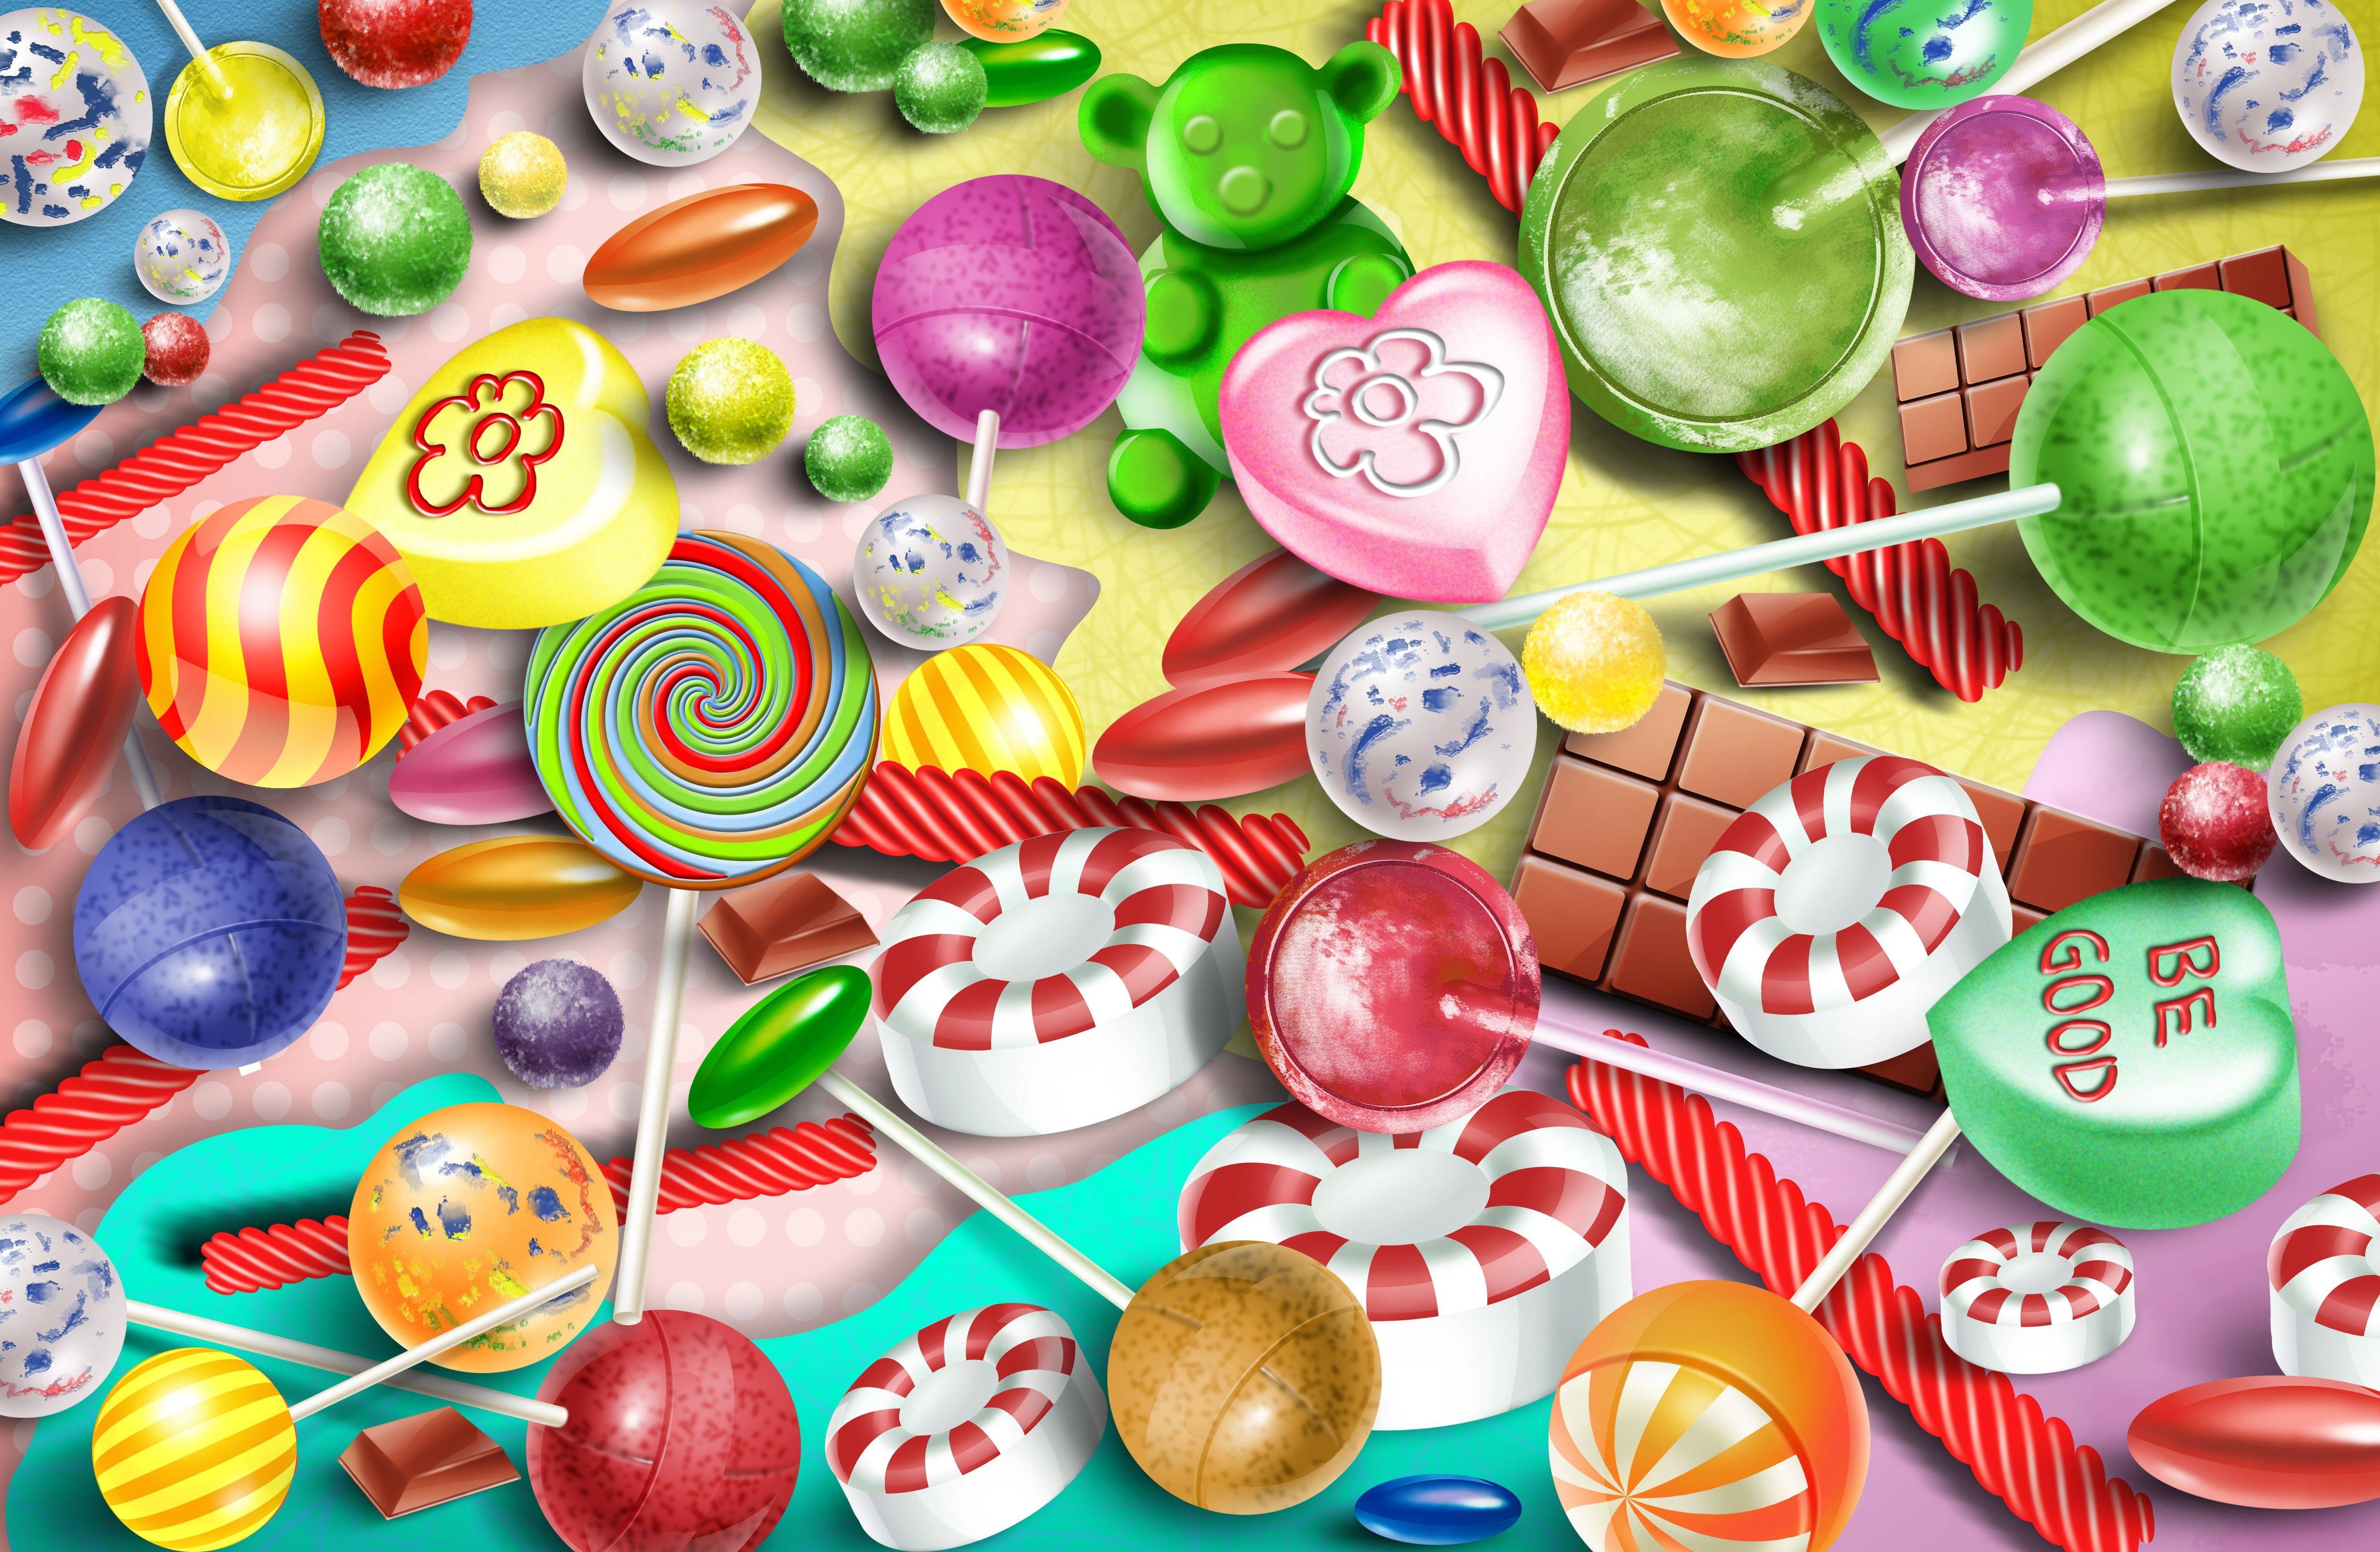 candy wallpaper hd,hard candy,confectionery,sweetness,lollipop,candy